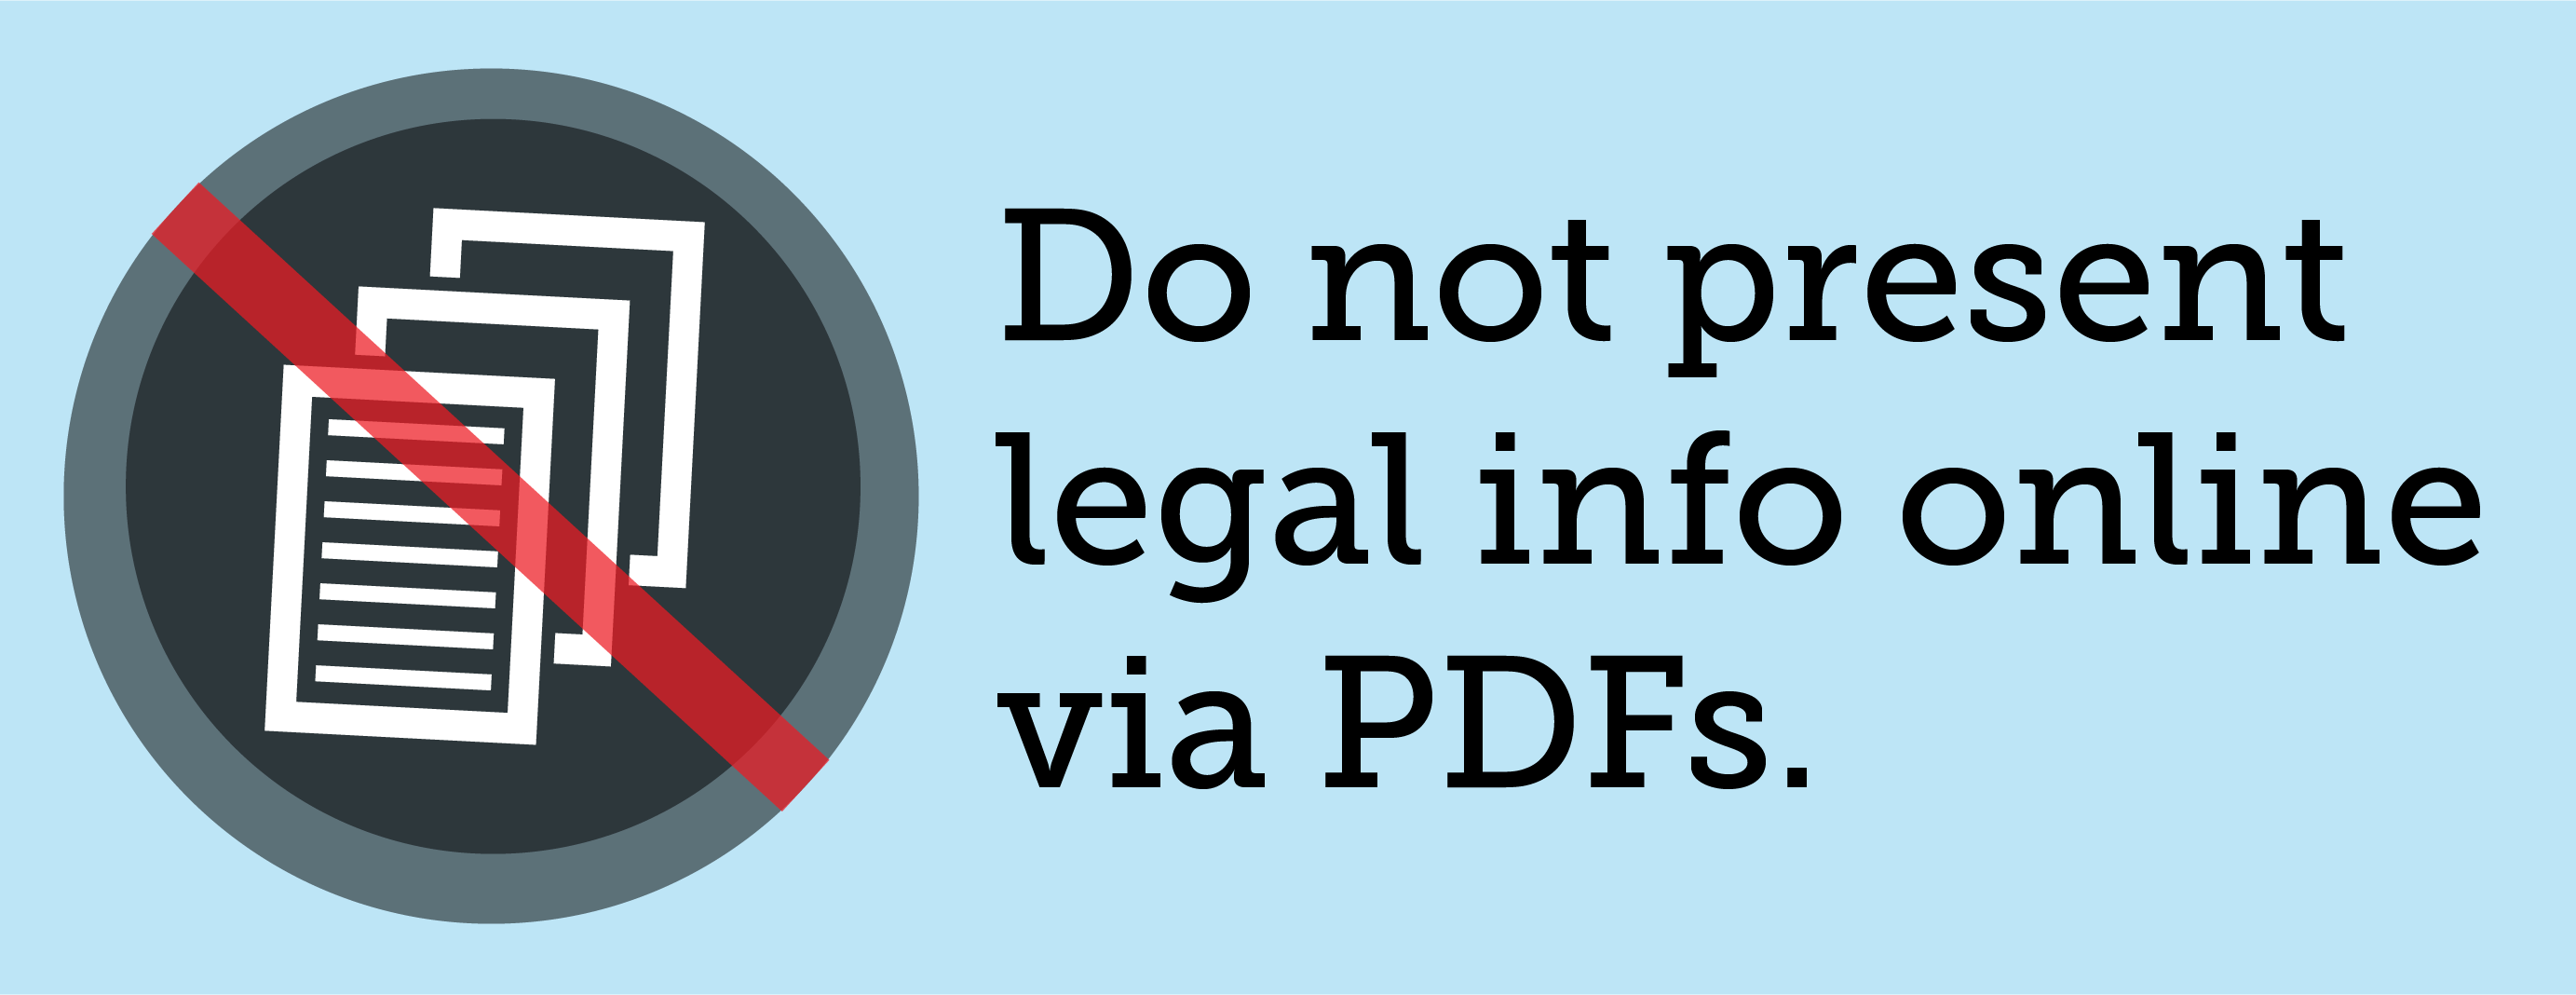 No Pdfs for legal information online - by Margaret Hagan - Open Law Lab-02